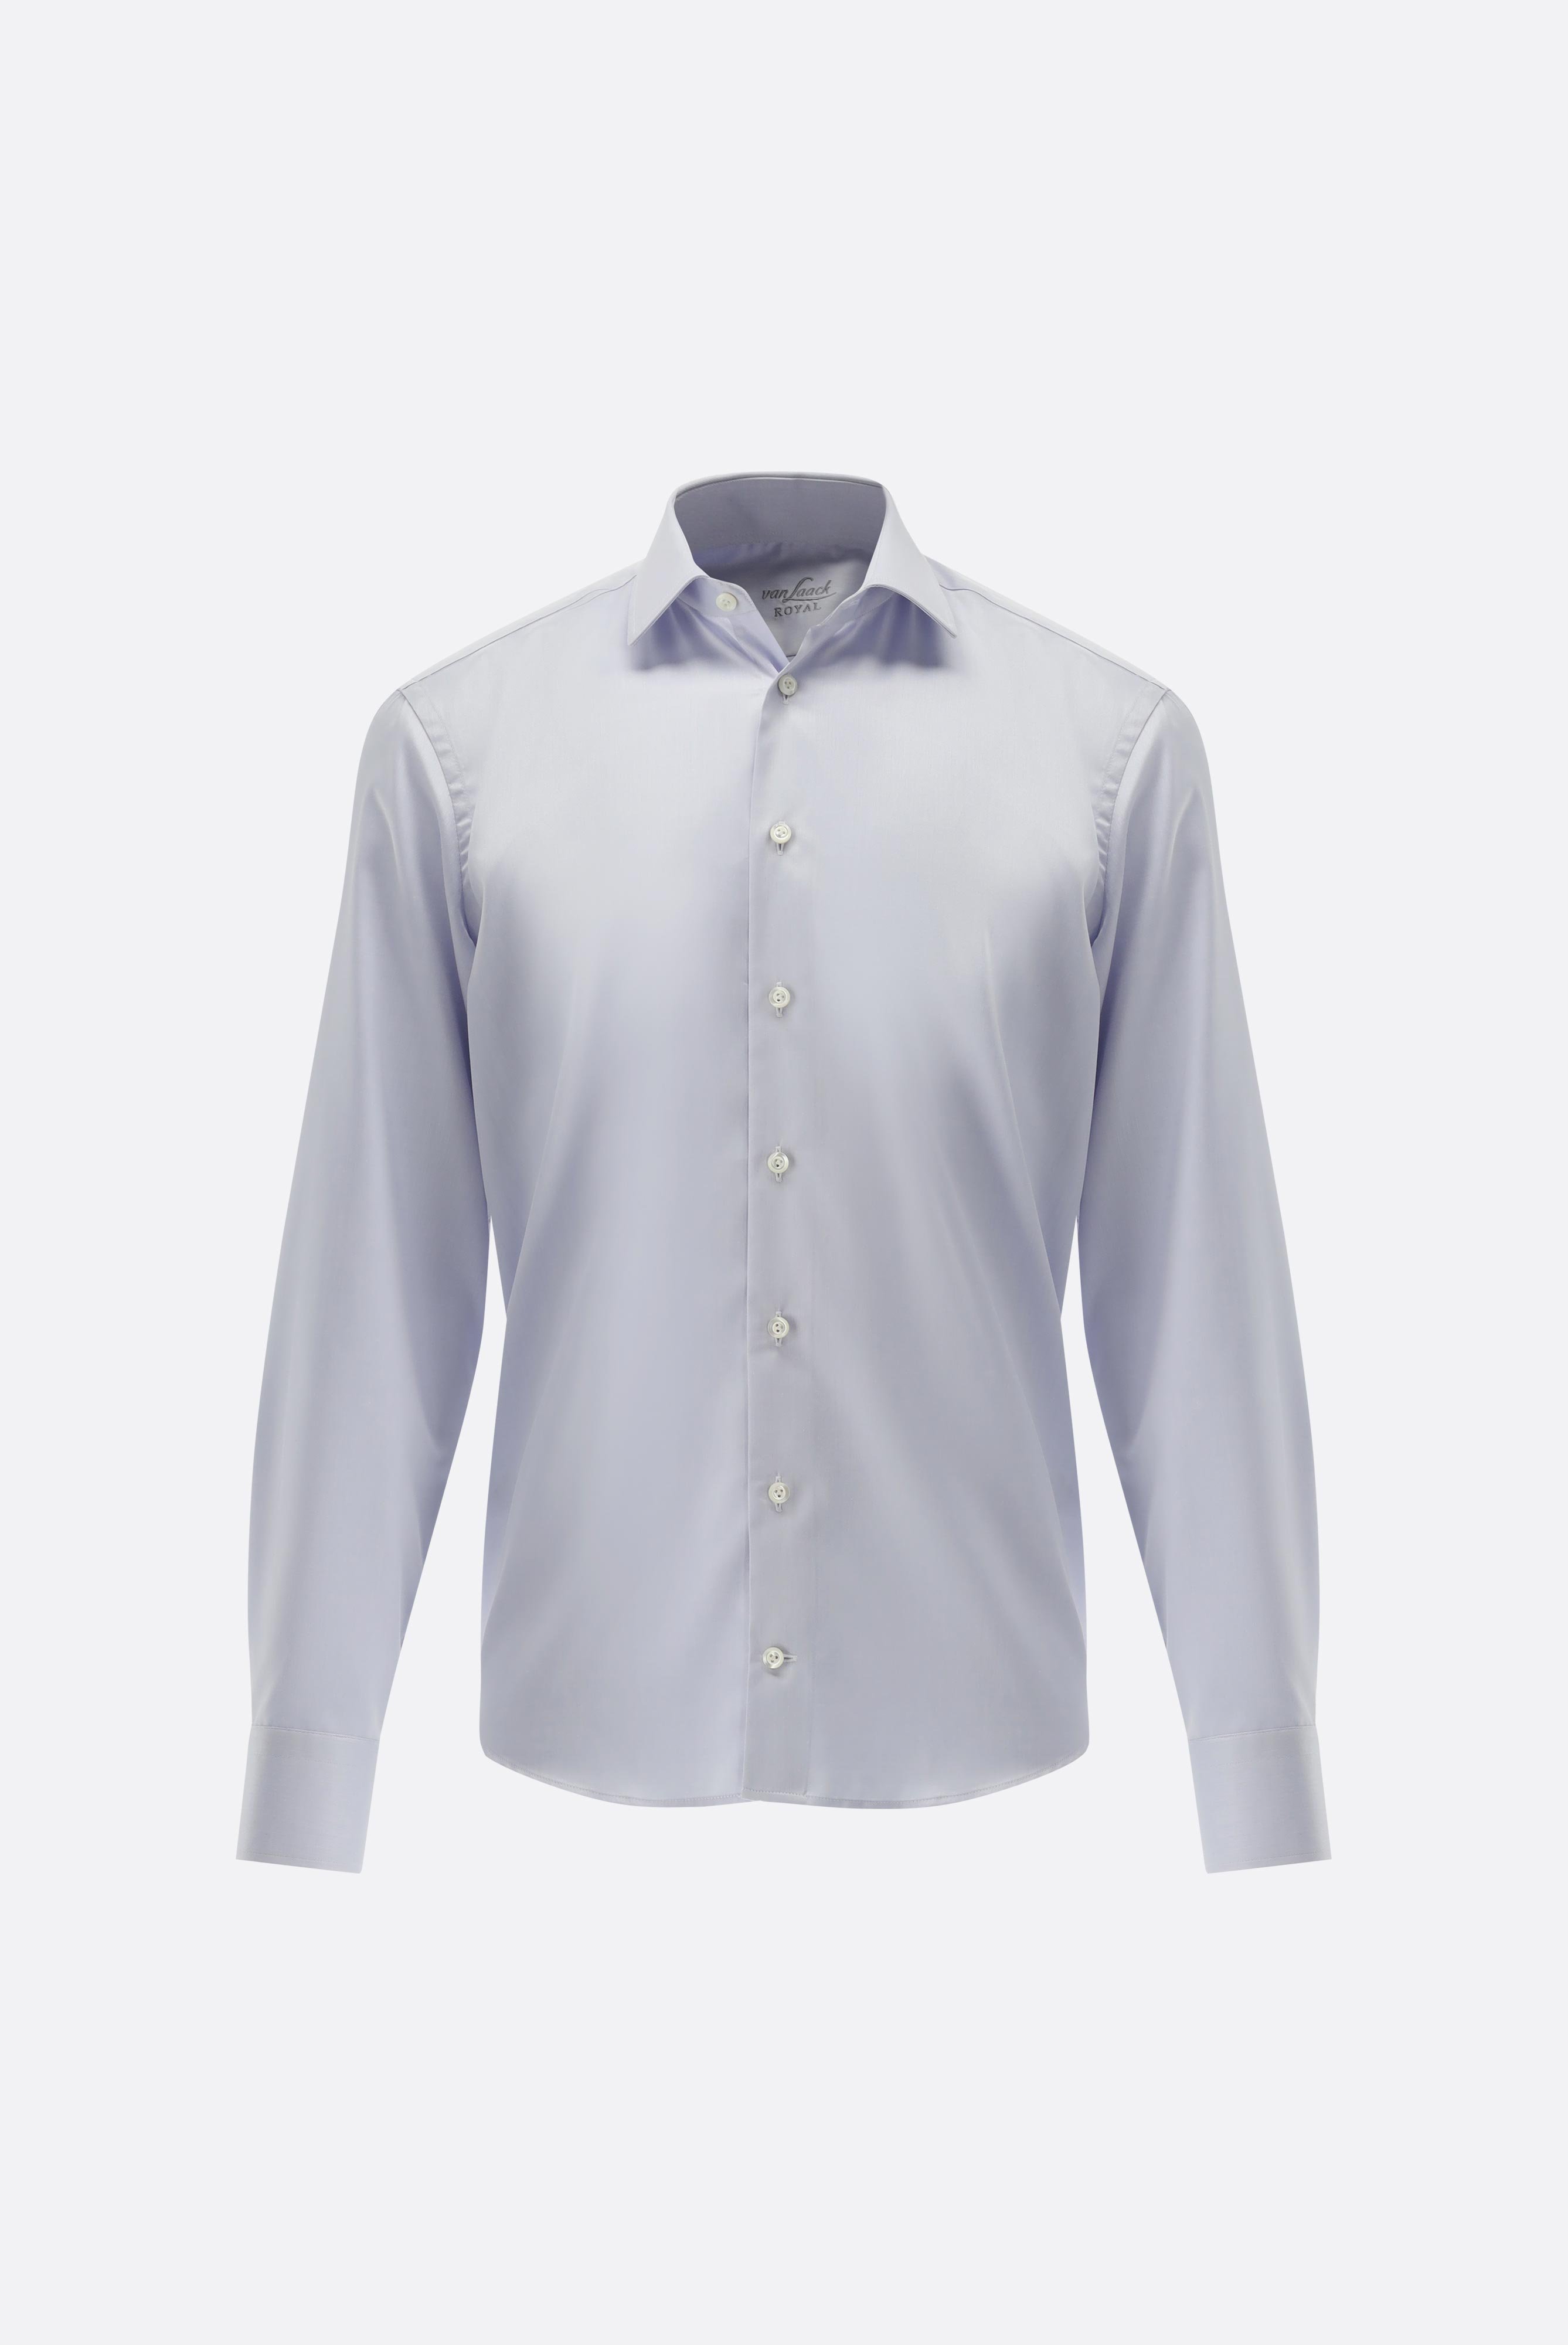 Business Shirts+Wrinkle Free Twill Shirt Tailor Fit+35.3033.BN.133342.726.38